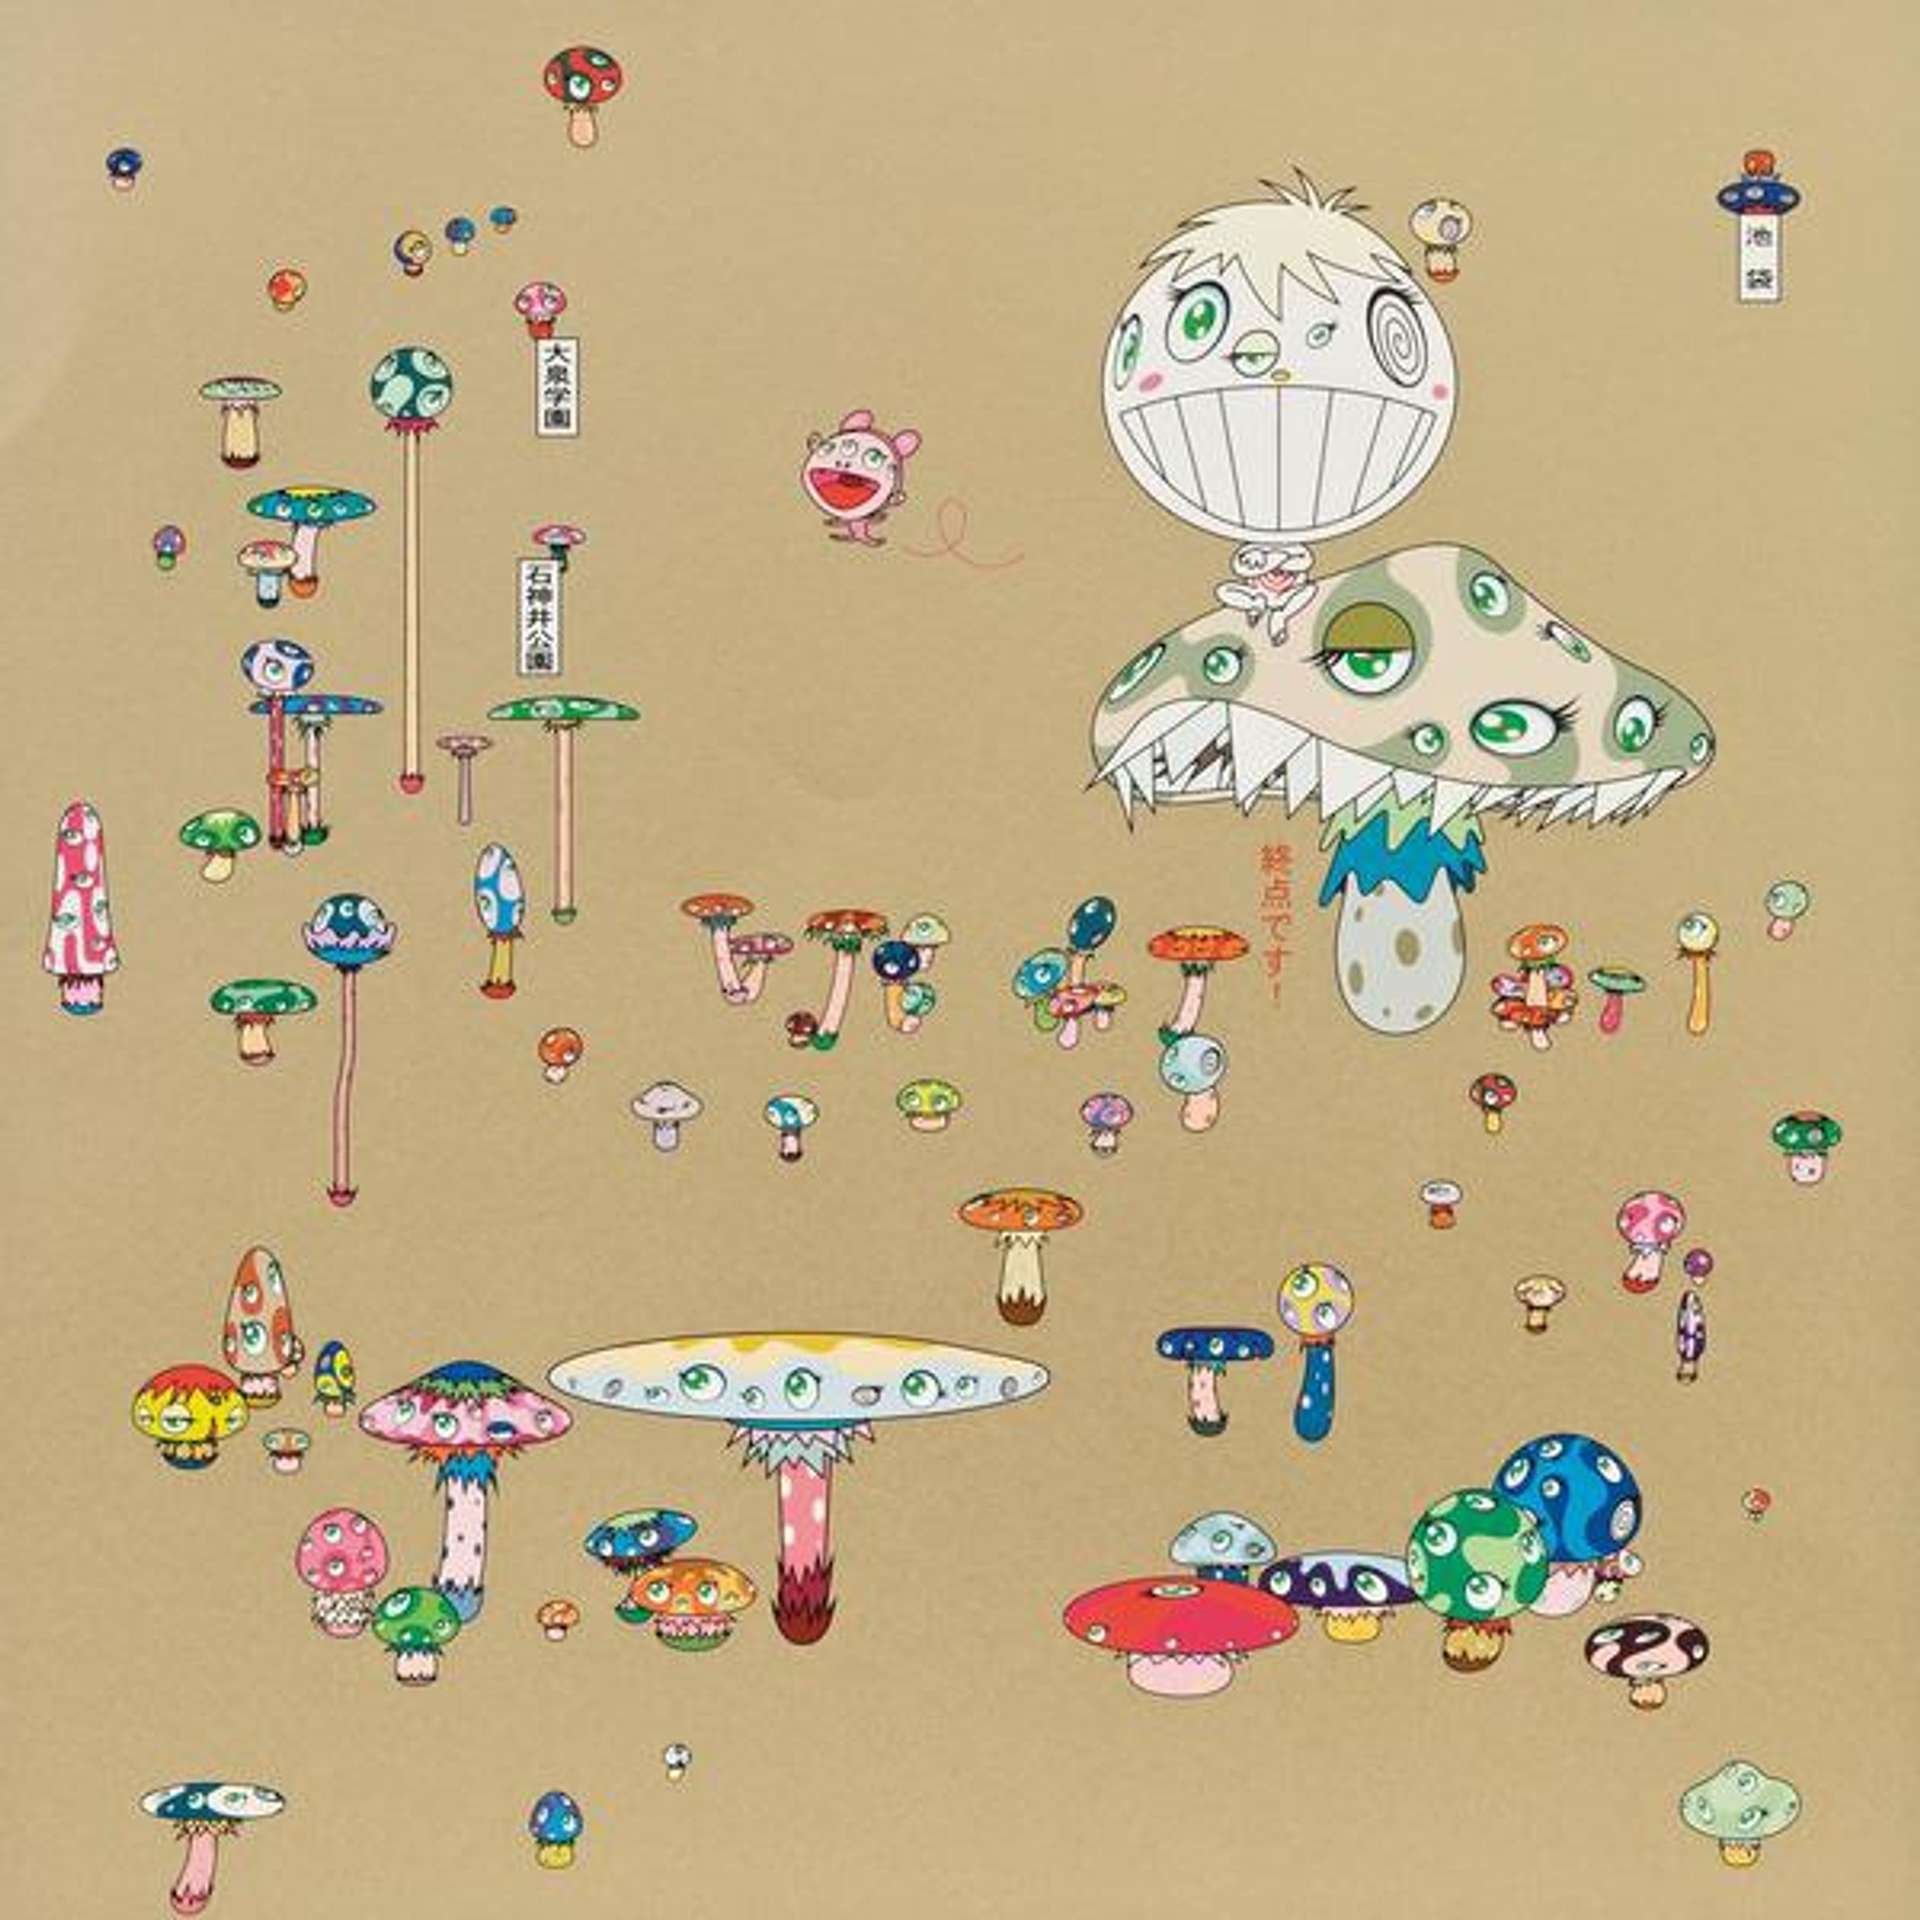 Takashi Murakami: Making A U-Turn, The Lost Child Finds His Way Home - Signed Print